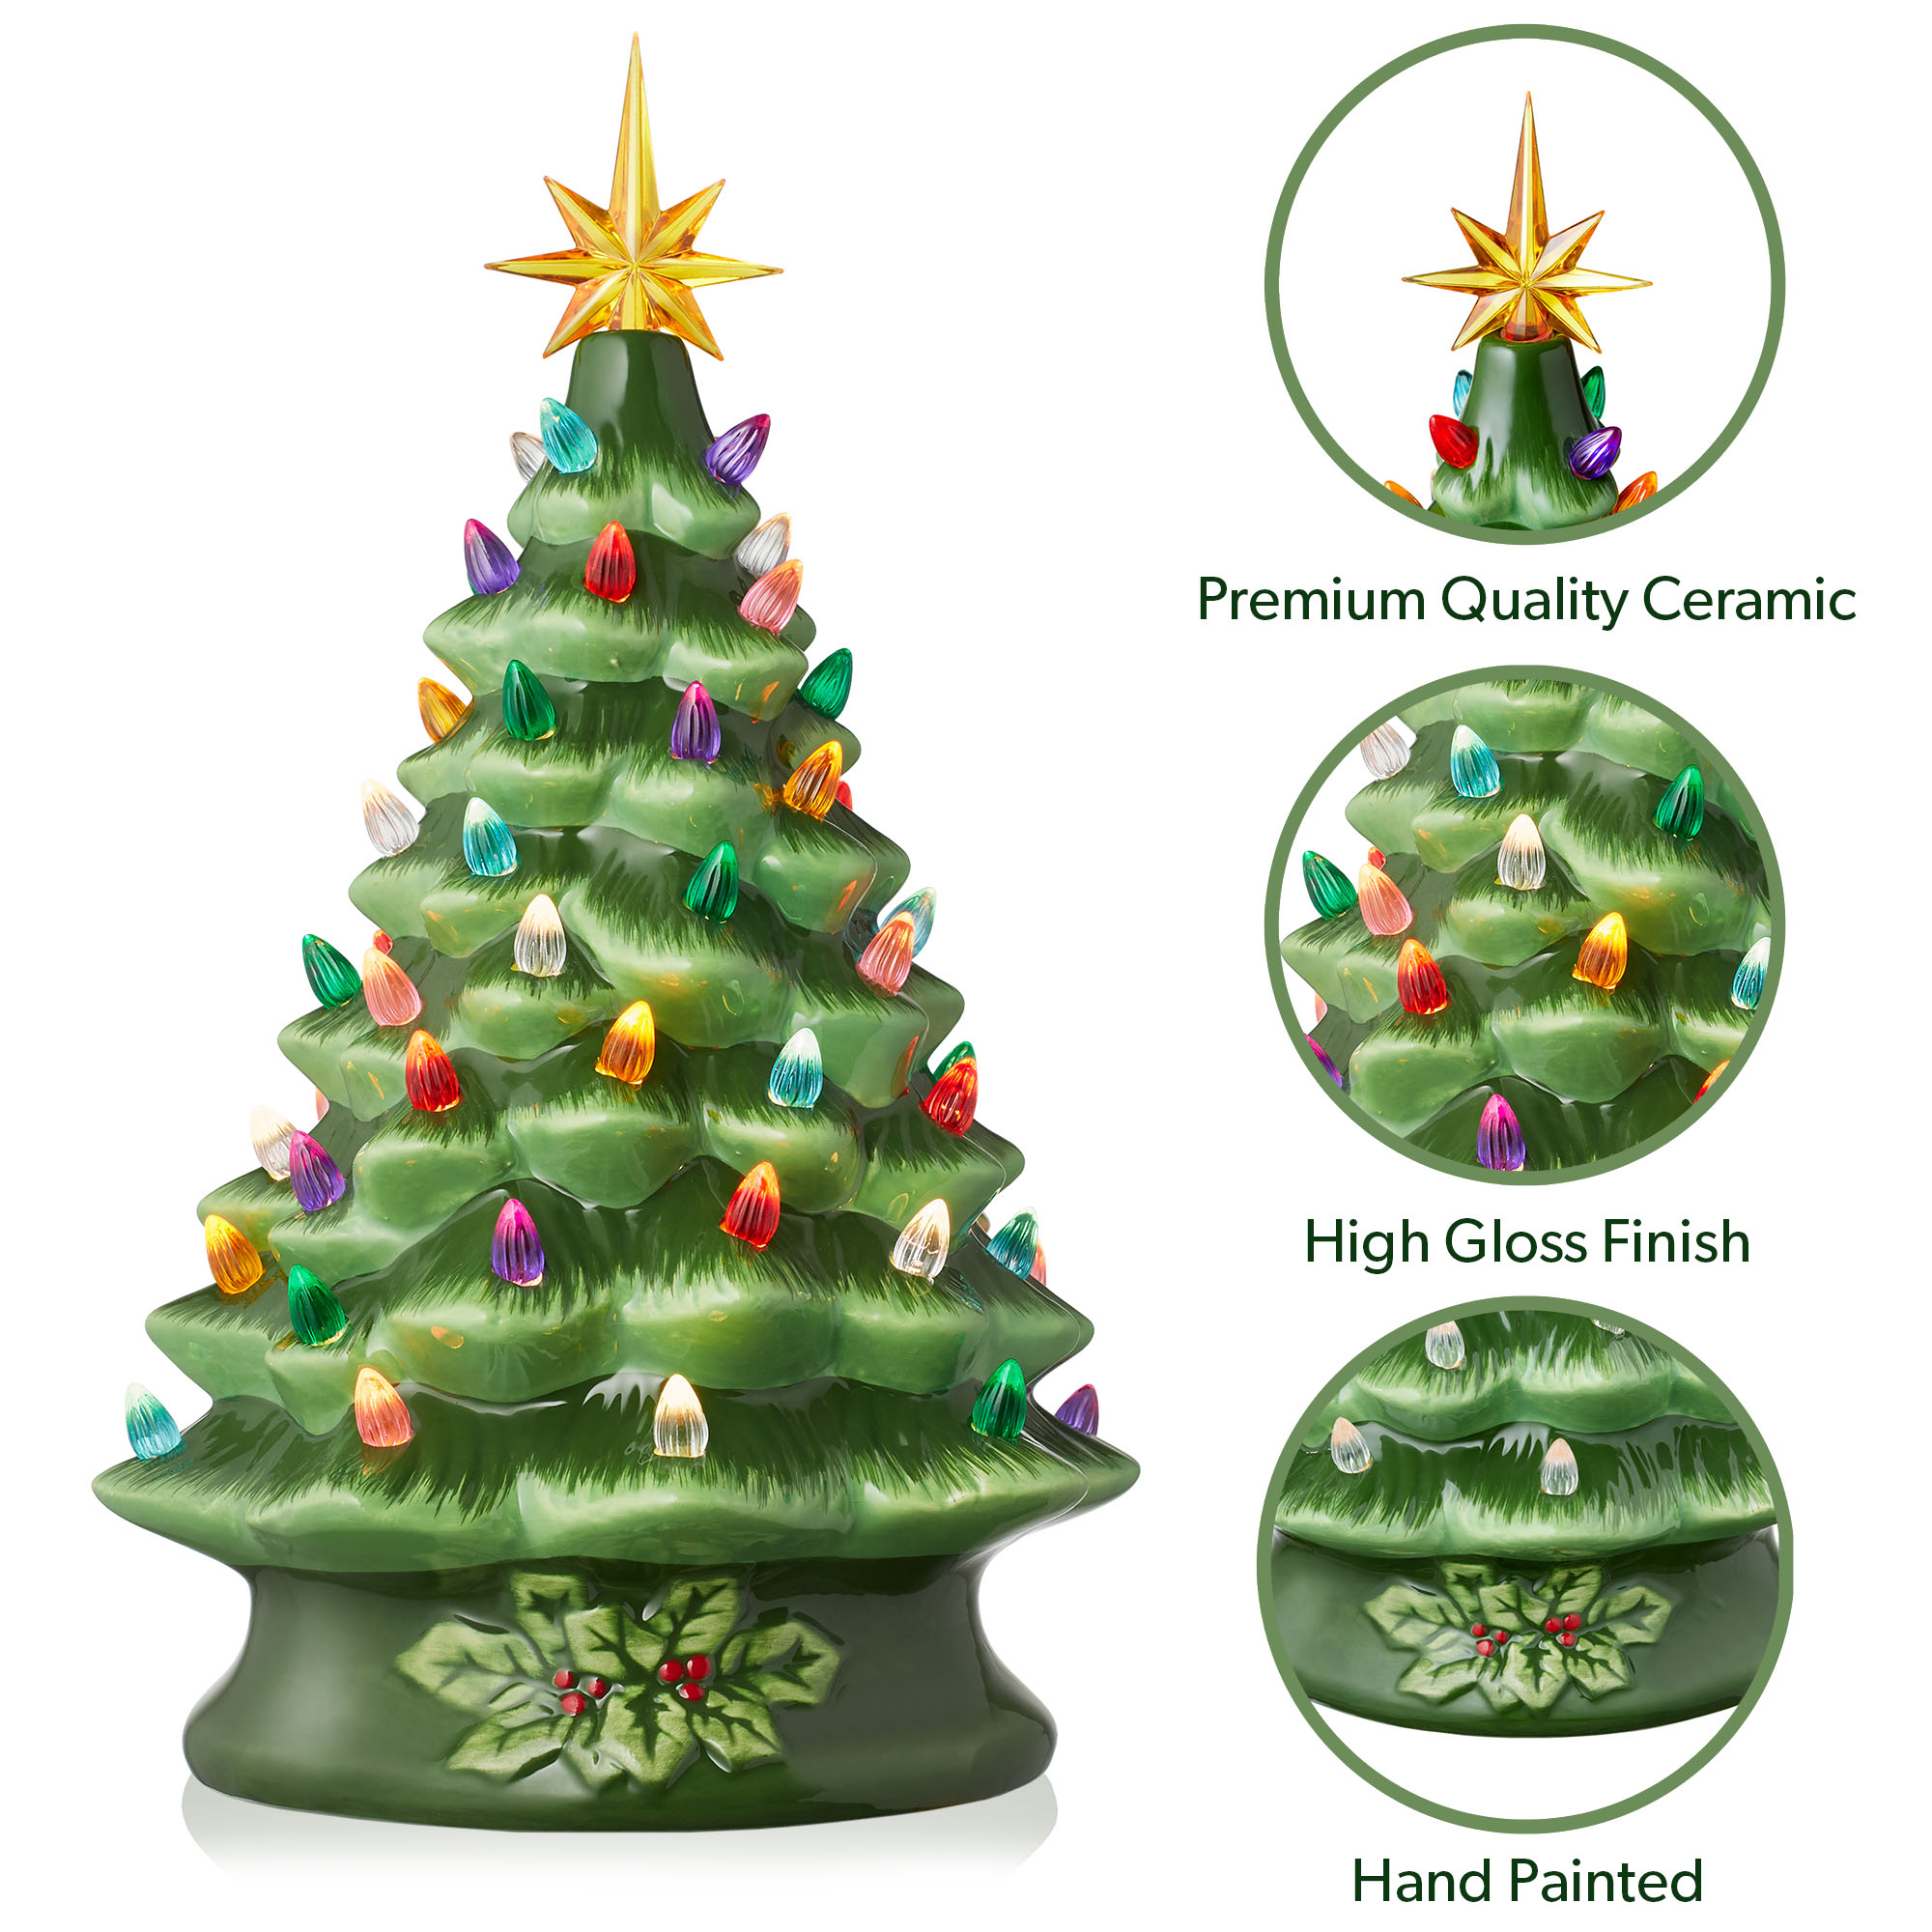 Casafield 15" Pre-Lit Green Ceramic Christmas Tree Hand-Painted Tabletop Decor with Lights